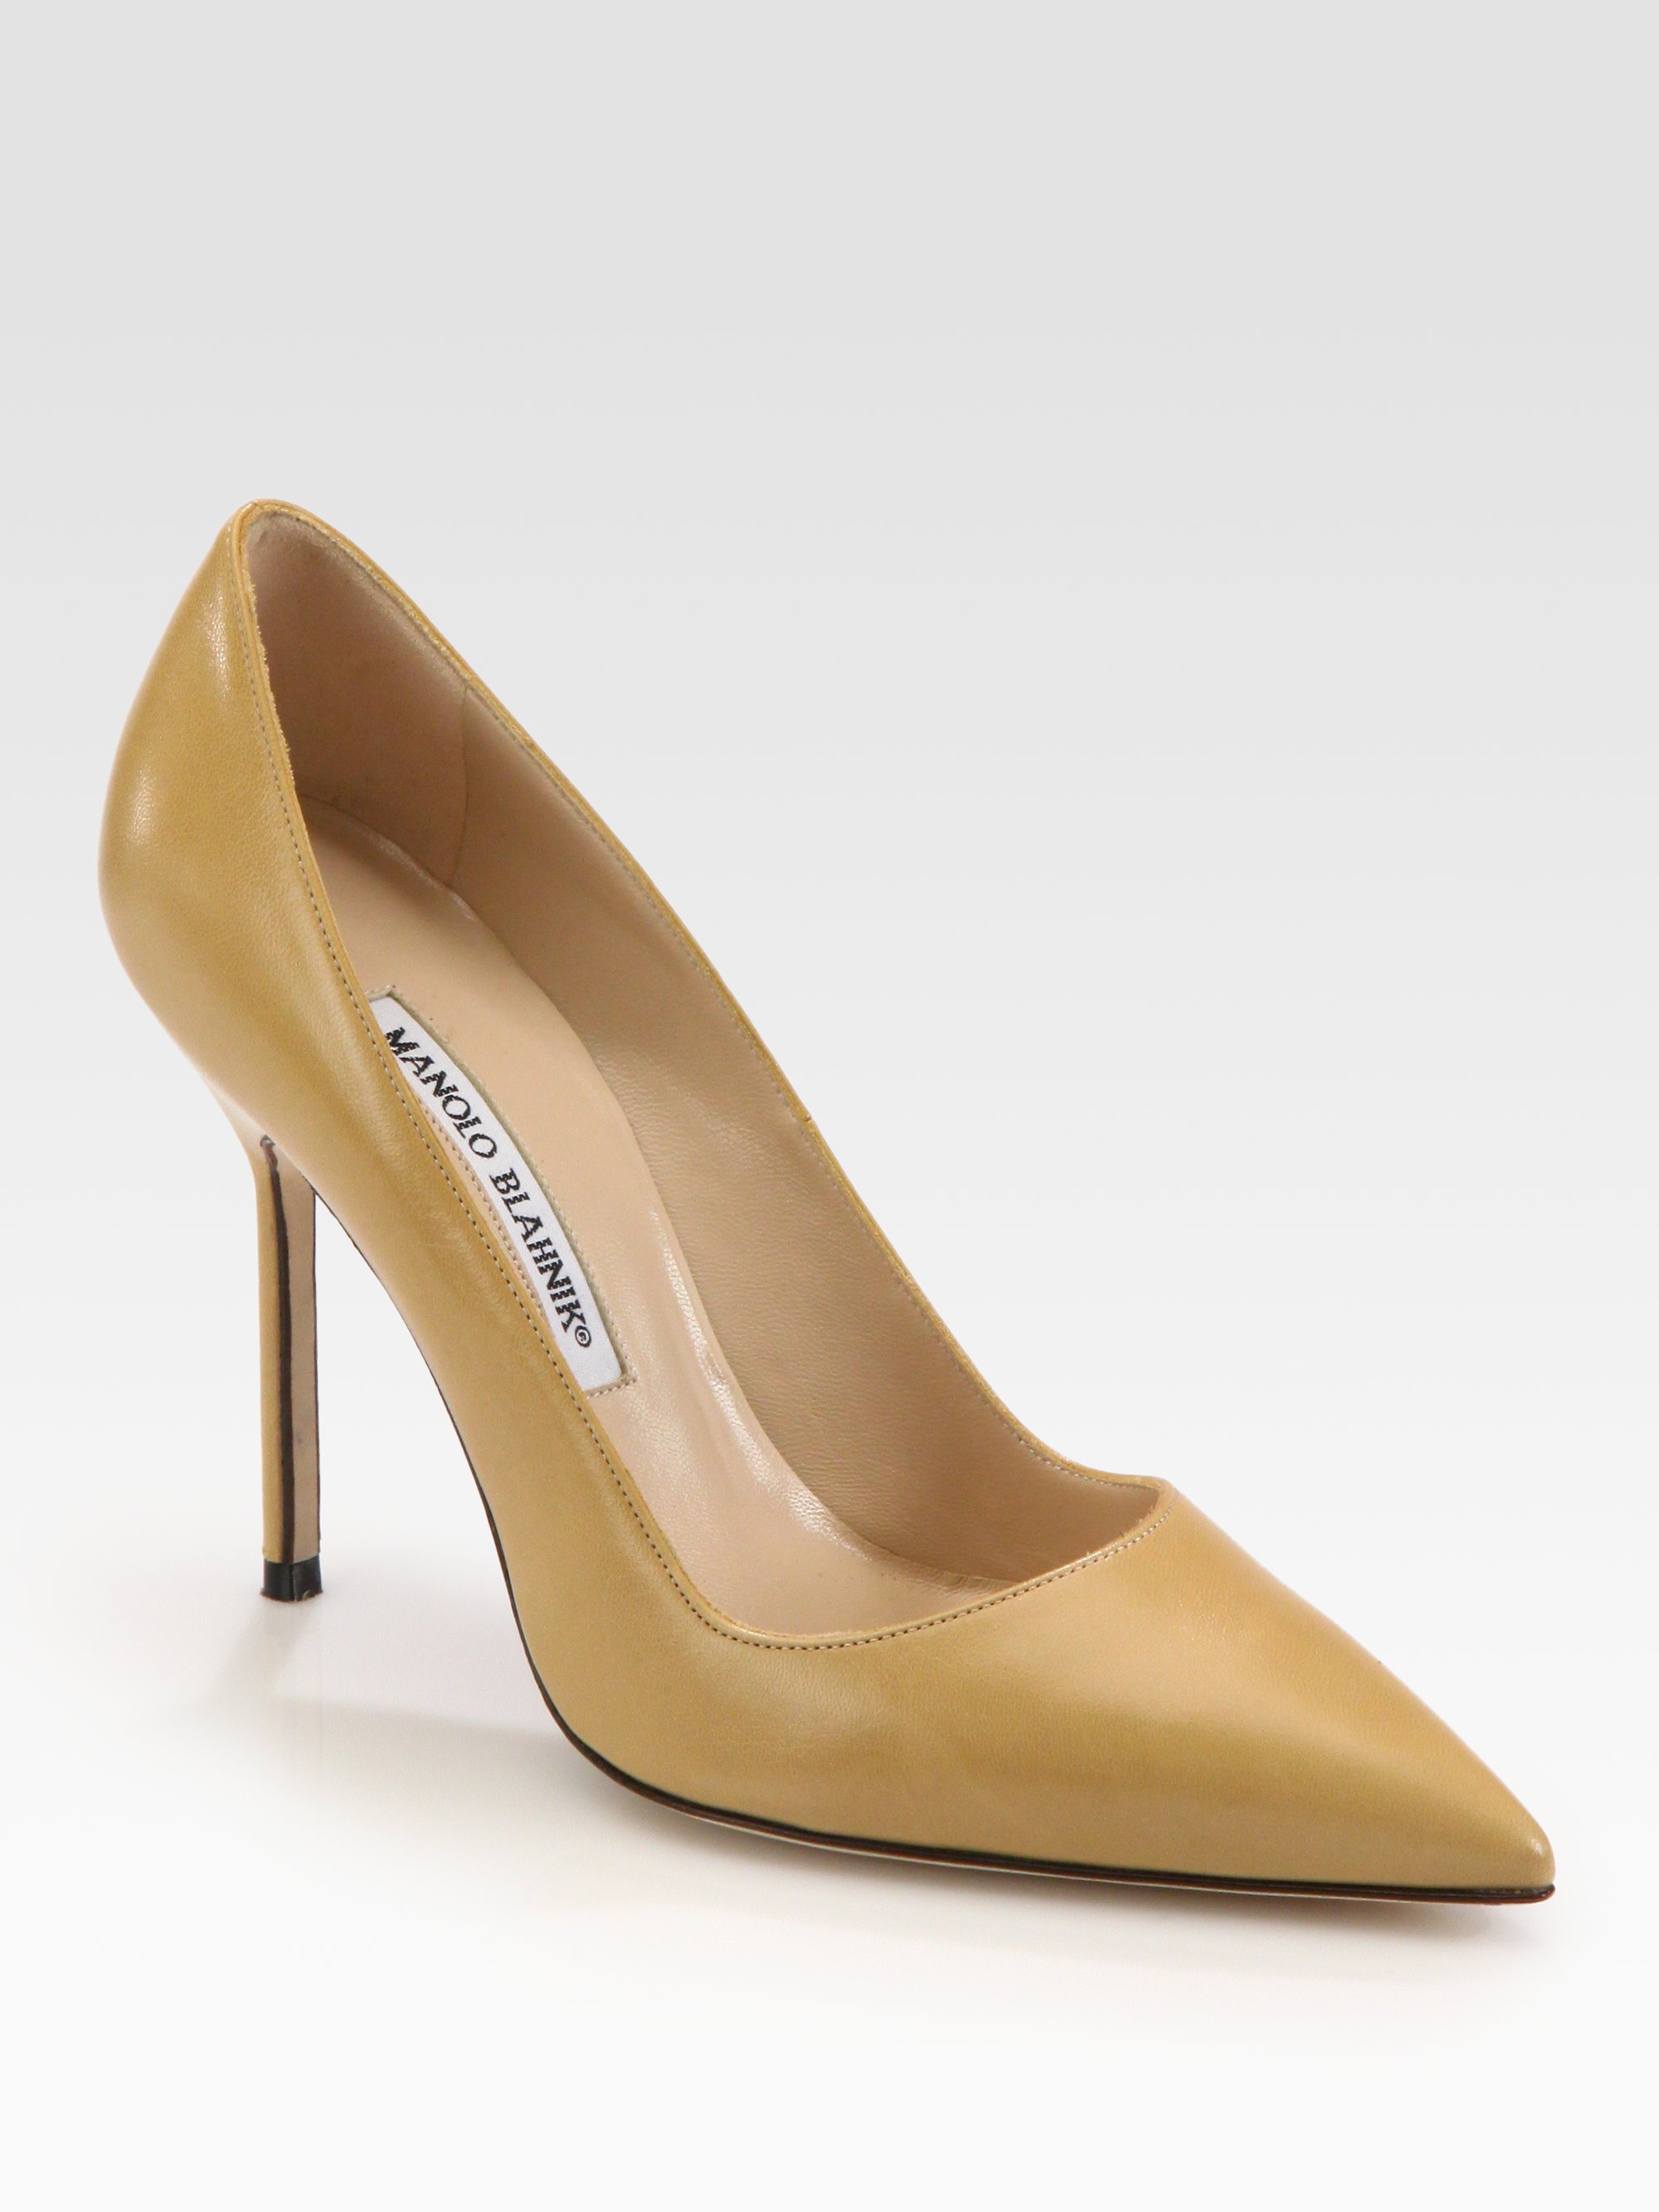 Lyst - Manolo Blahnik Bb 105 Leather Point Toe Pumps in Natural